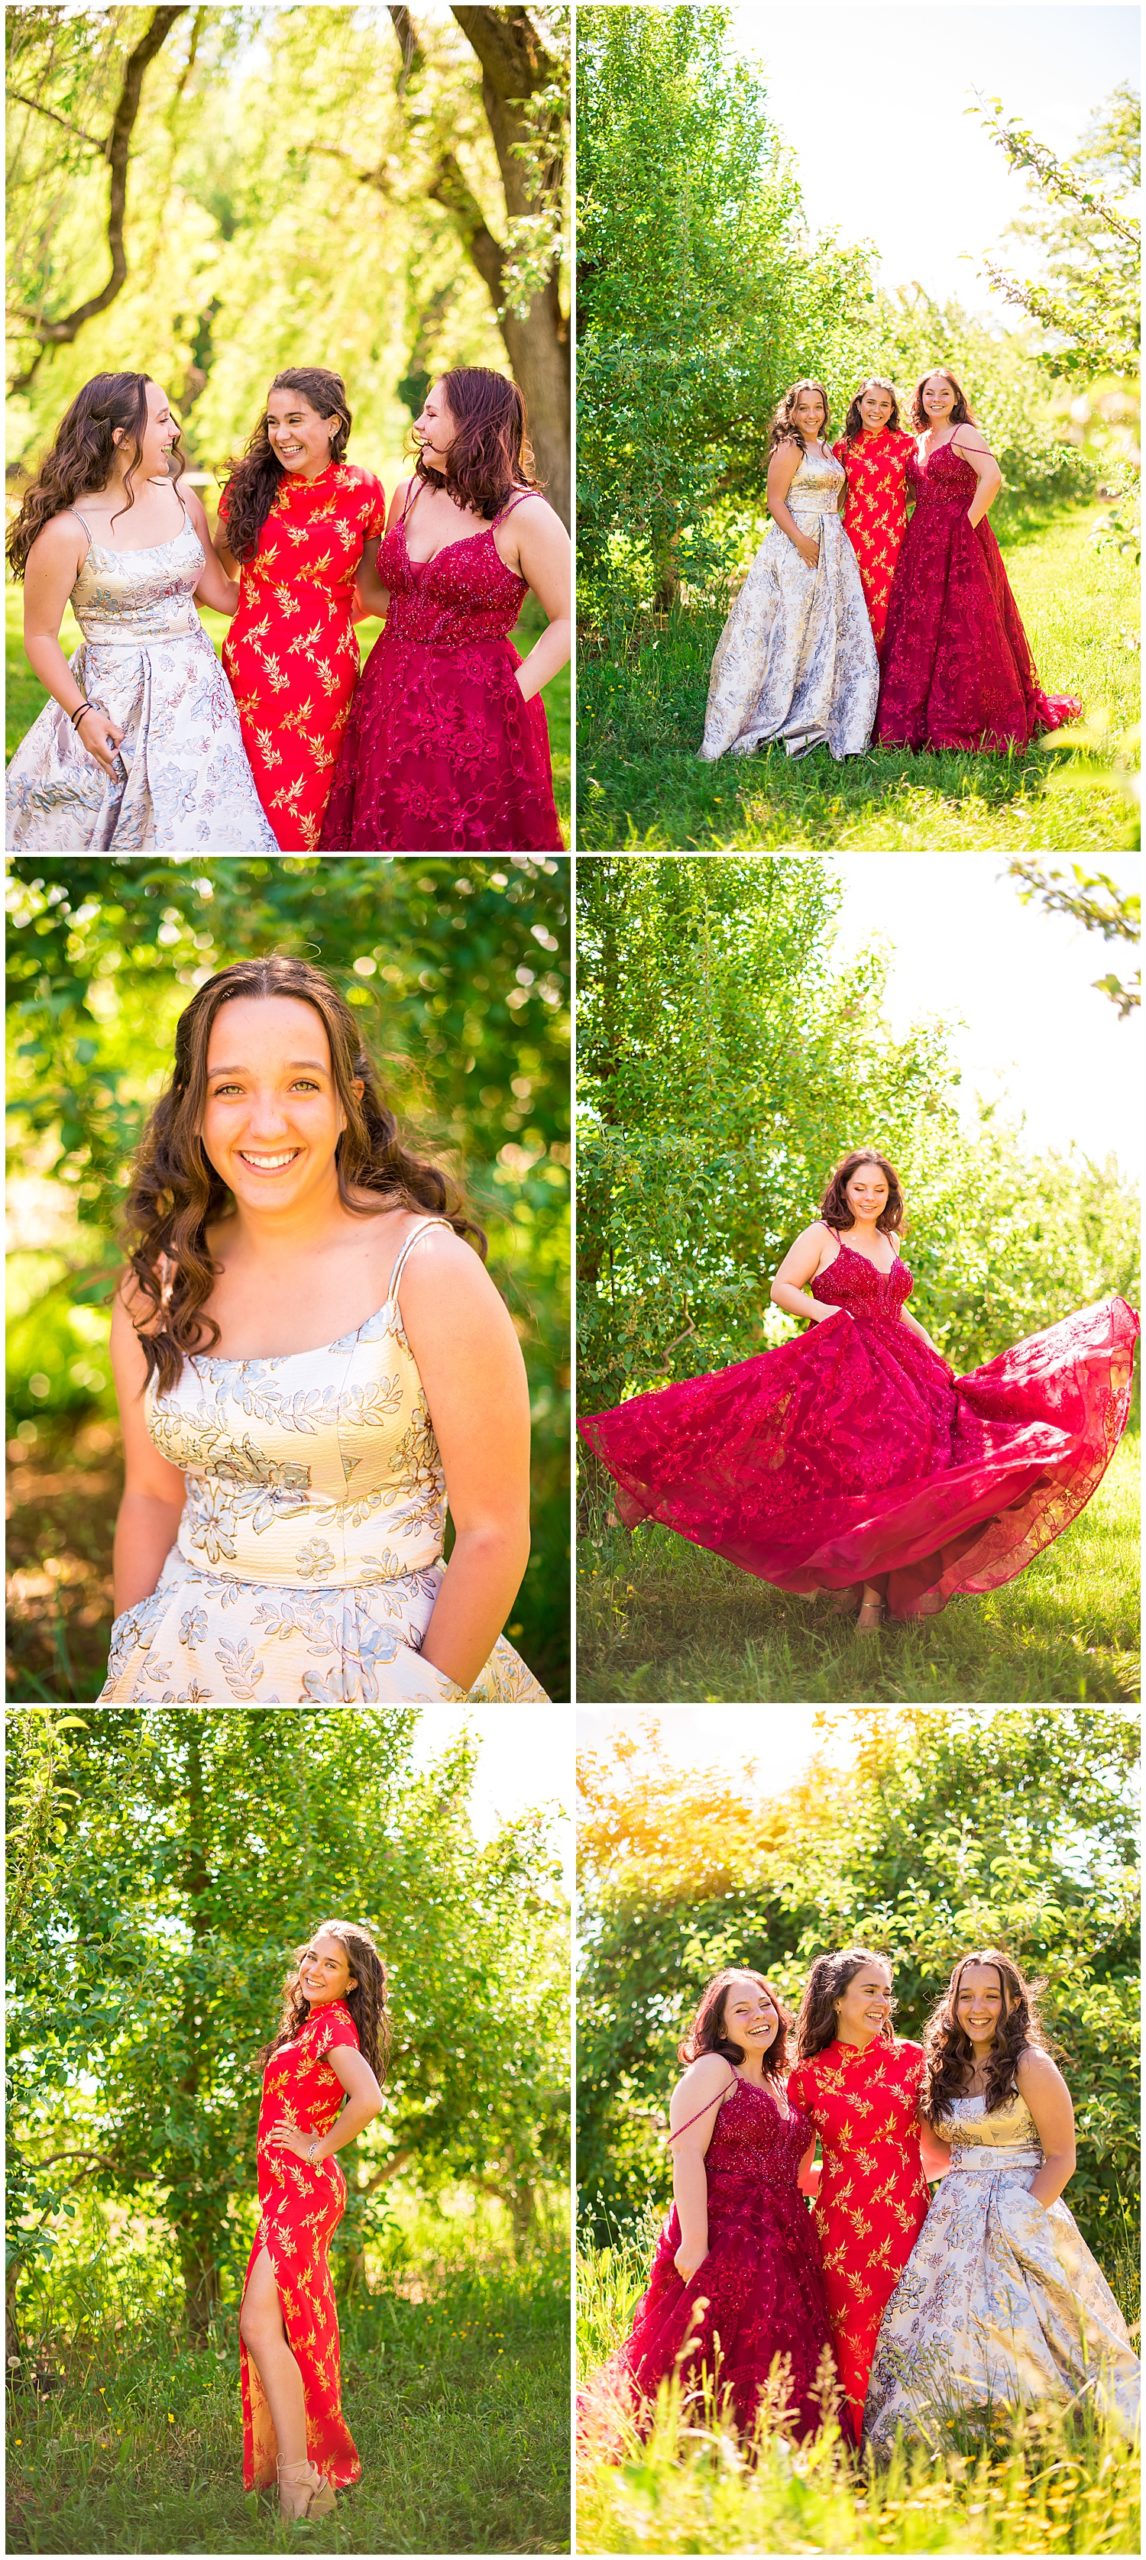 prom themed photo session with friends